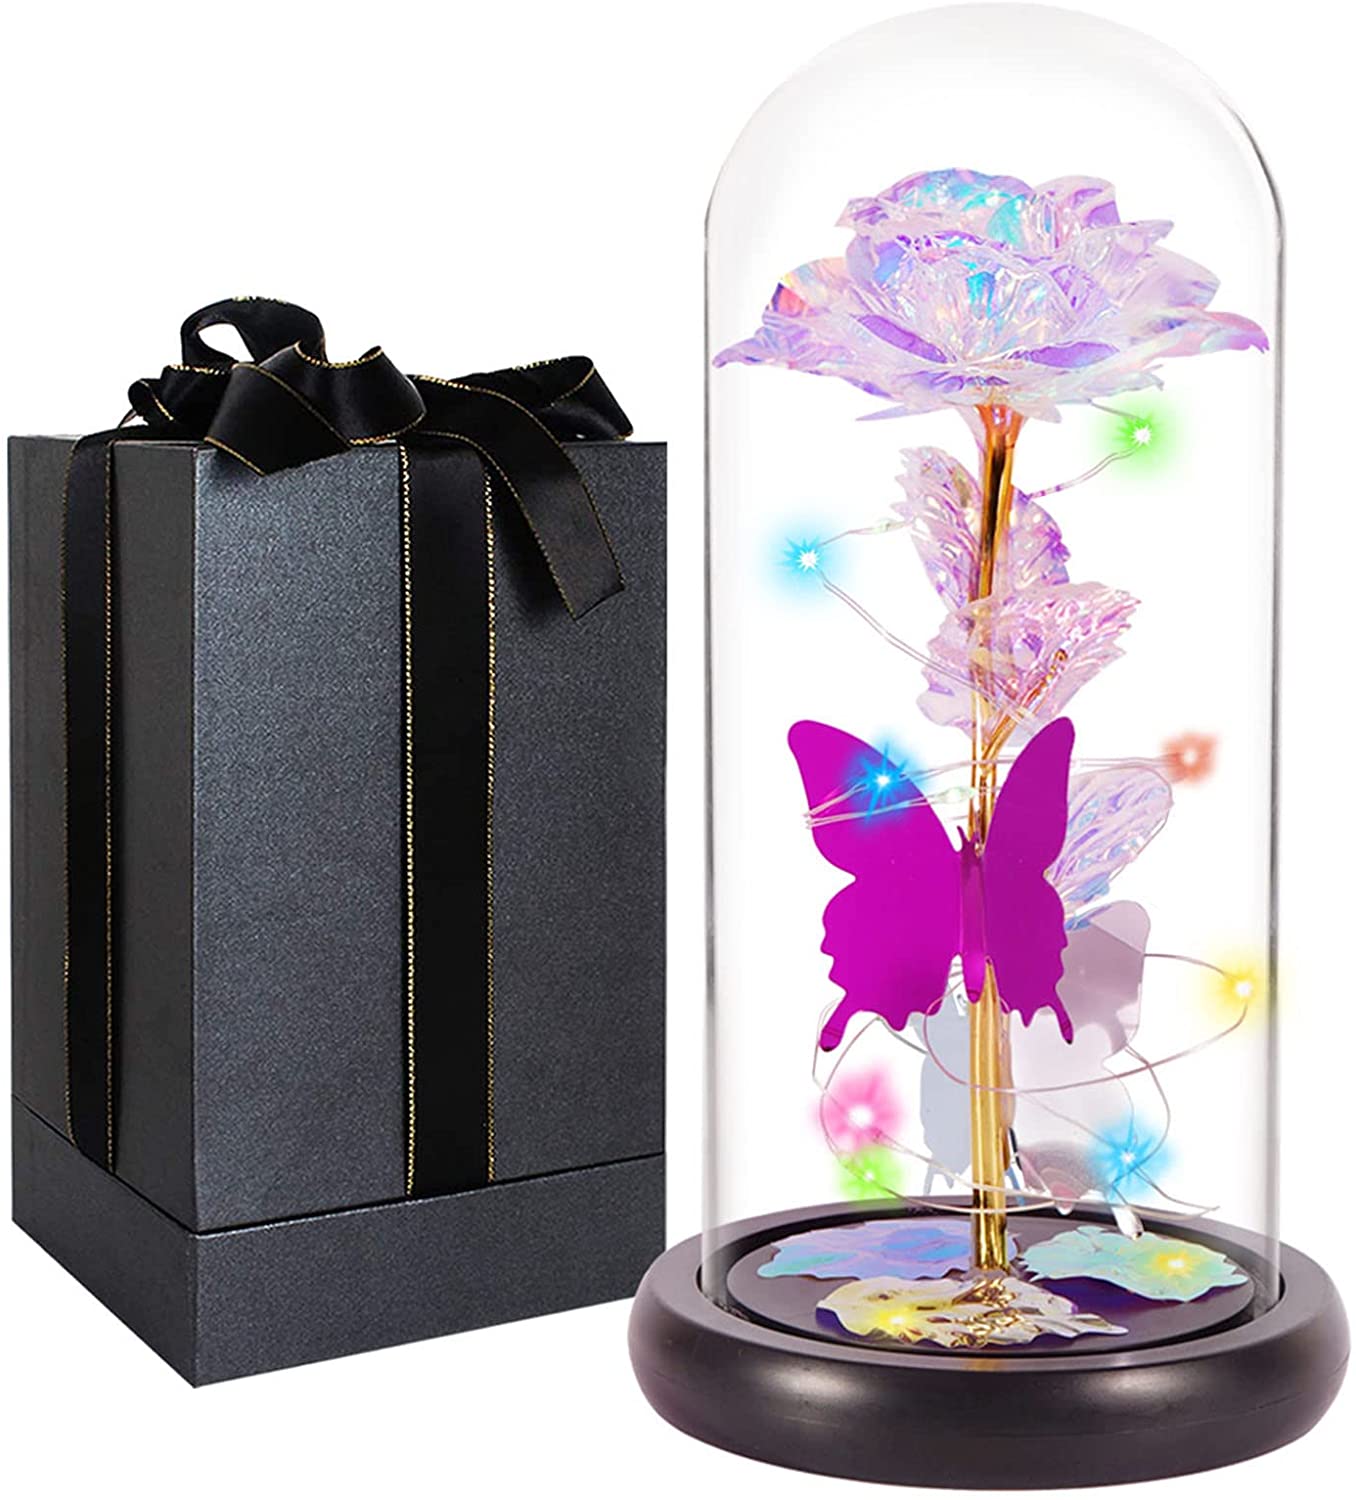 A ModernMazing Valentines Day Gifts for Her Rose Gifts,Love Flower Galaxy Rose with Led Decor in Glass Dome Valentines Gifts,Unique Gifts for Her next to a gift box.